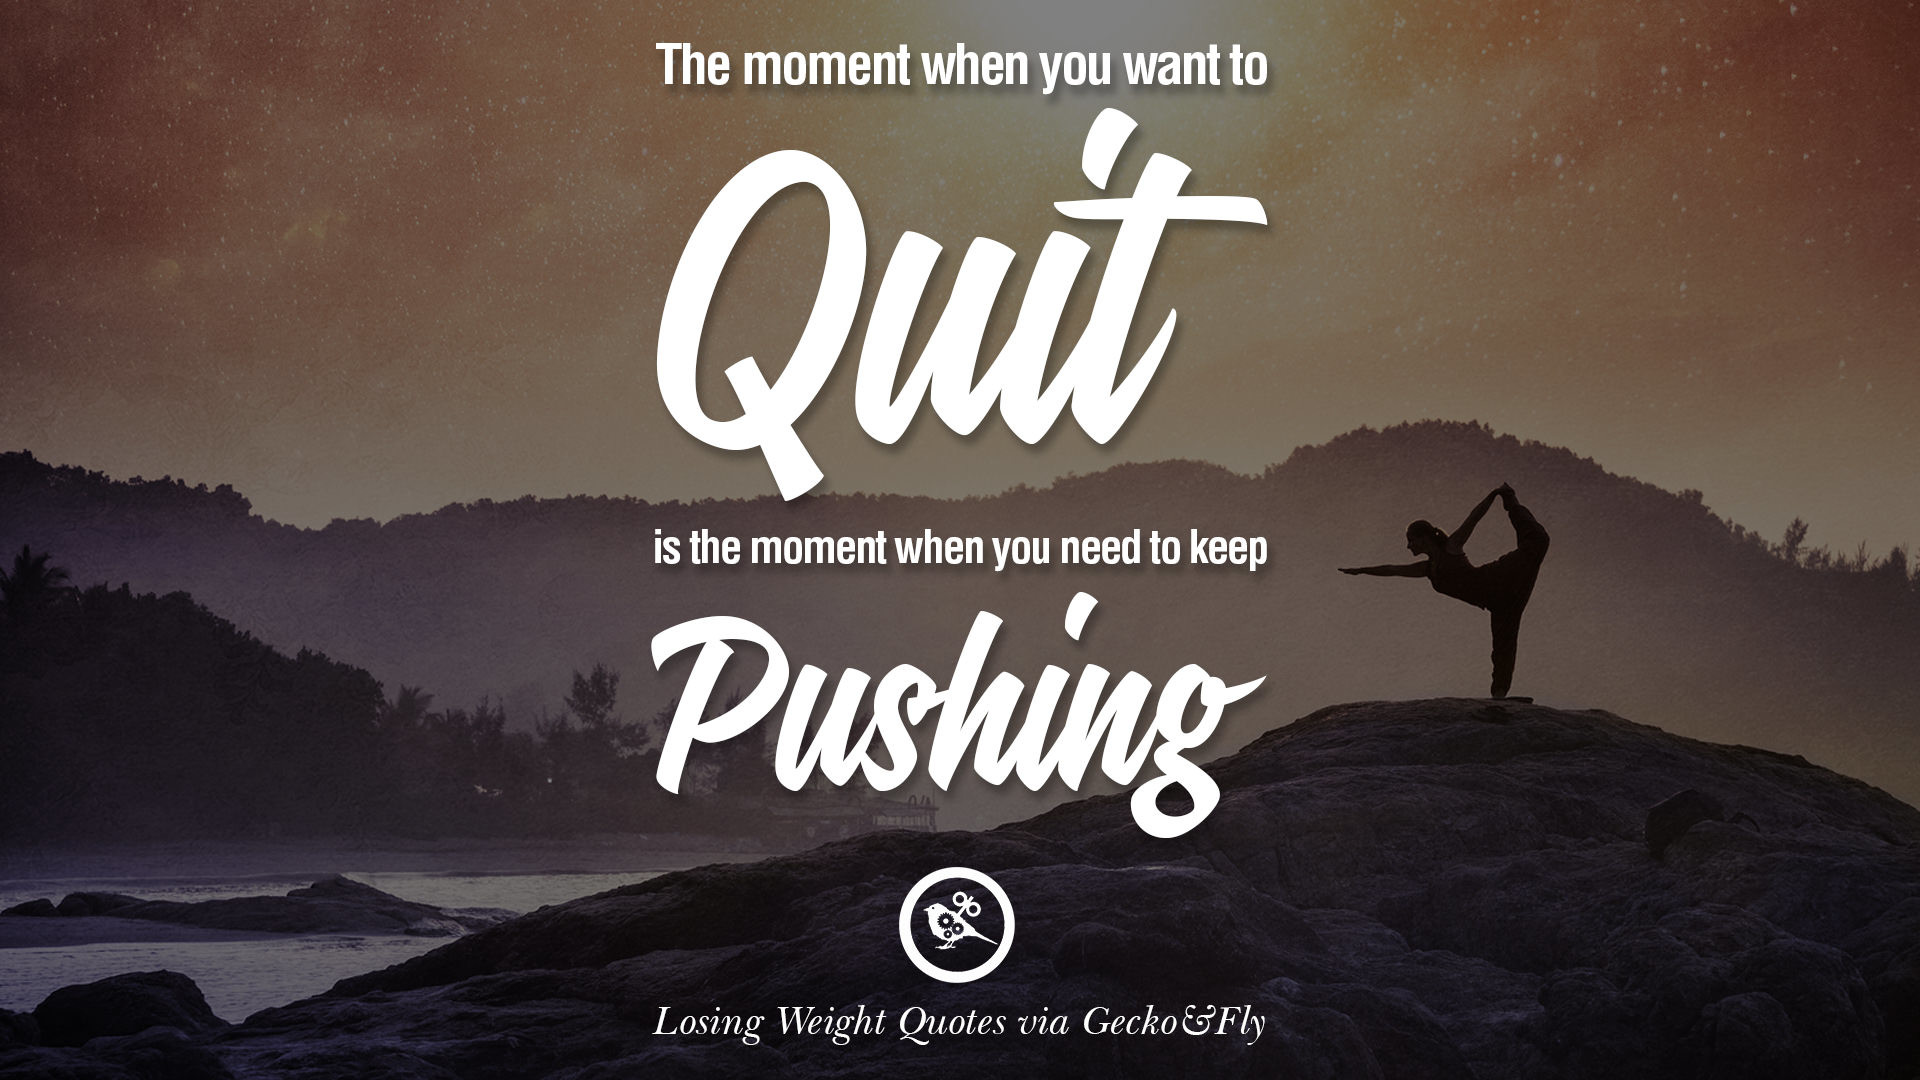 1920x1080 The moment when you want to quit is the moment when you need to keep pushing